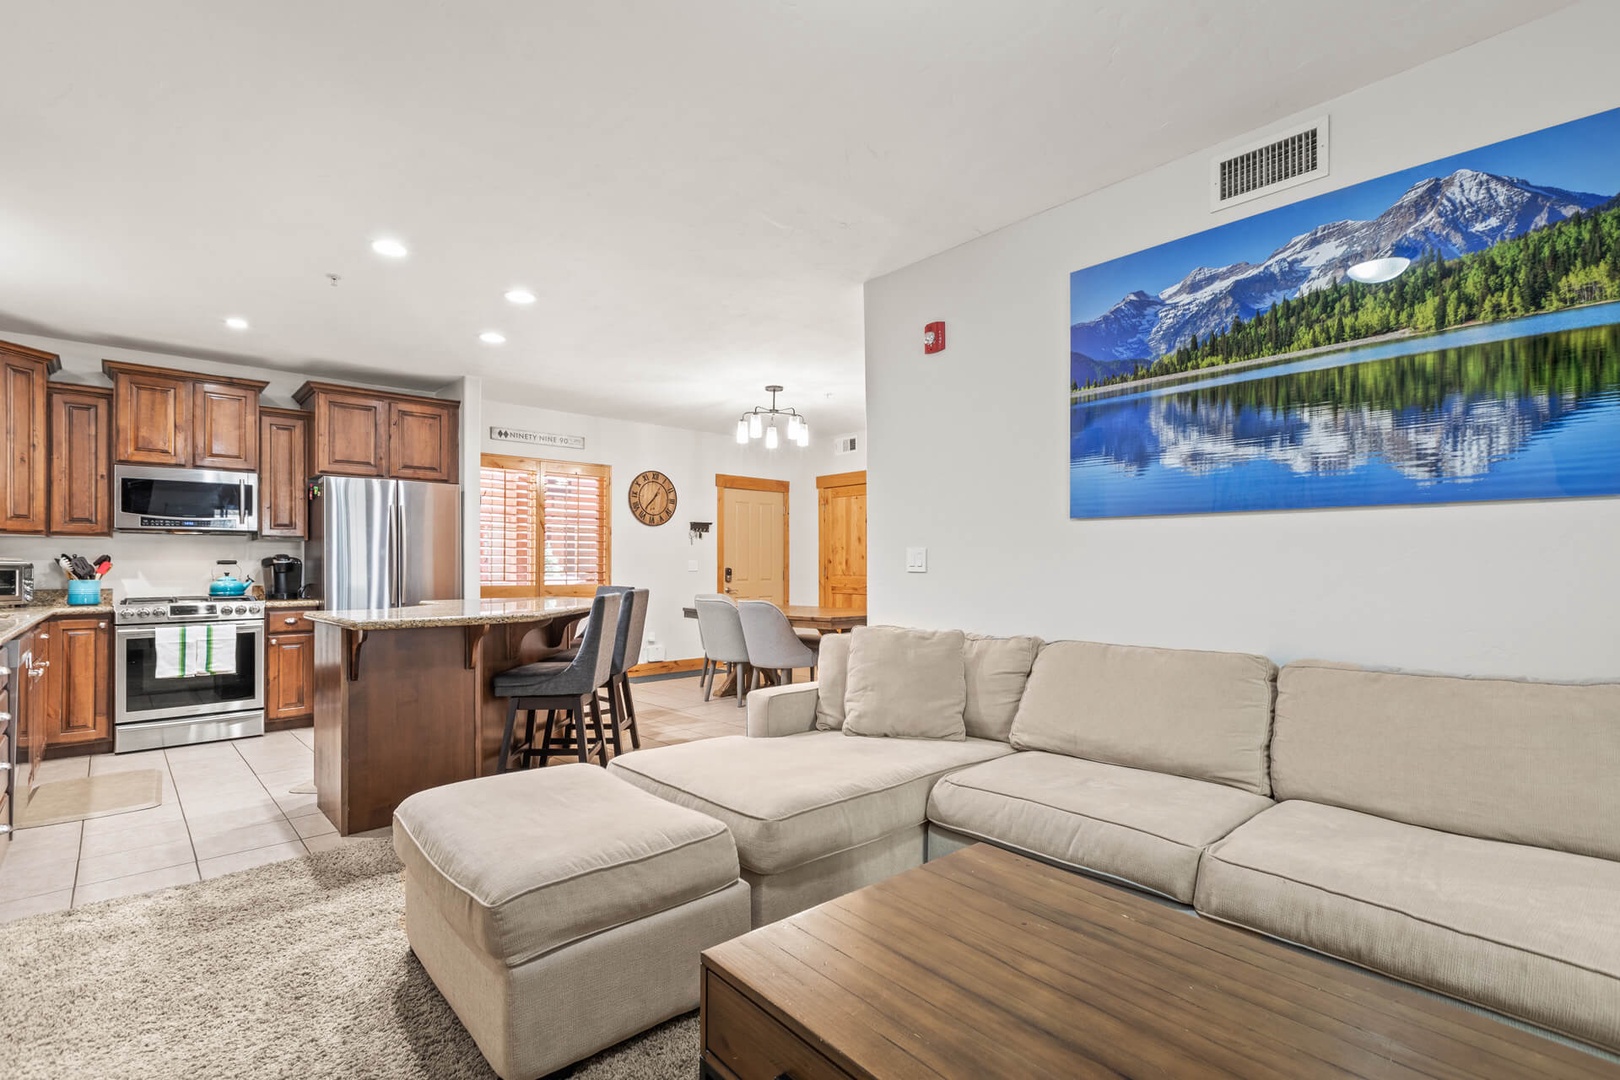 Bear Hollow Lodges 4203: Gathering and entertaining is welcome with the open floor plan offering plenty of seating, tables for eating and games and easy kitchen access.